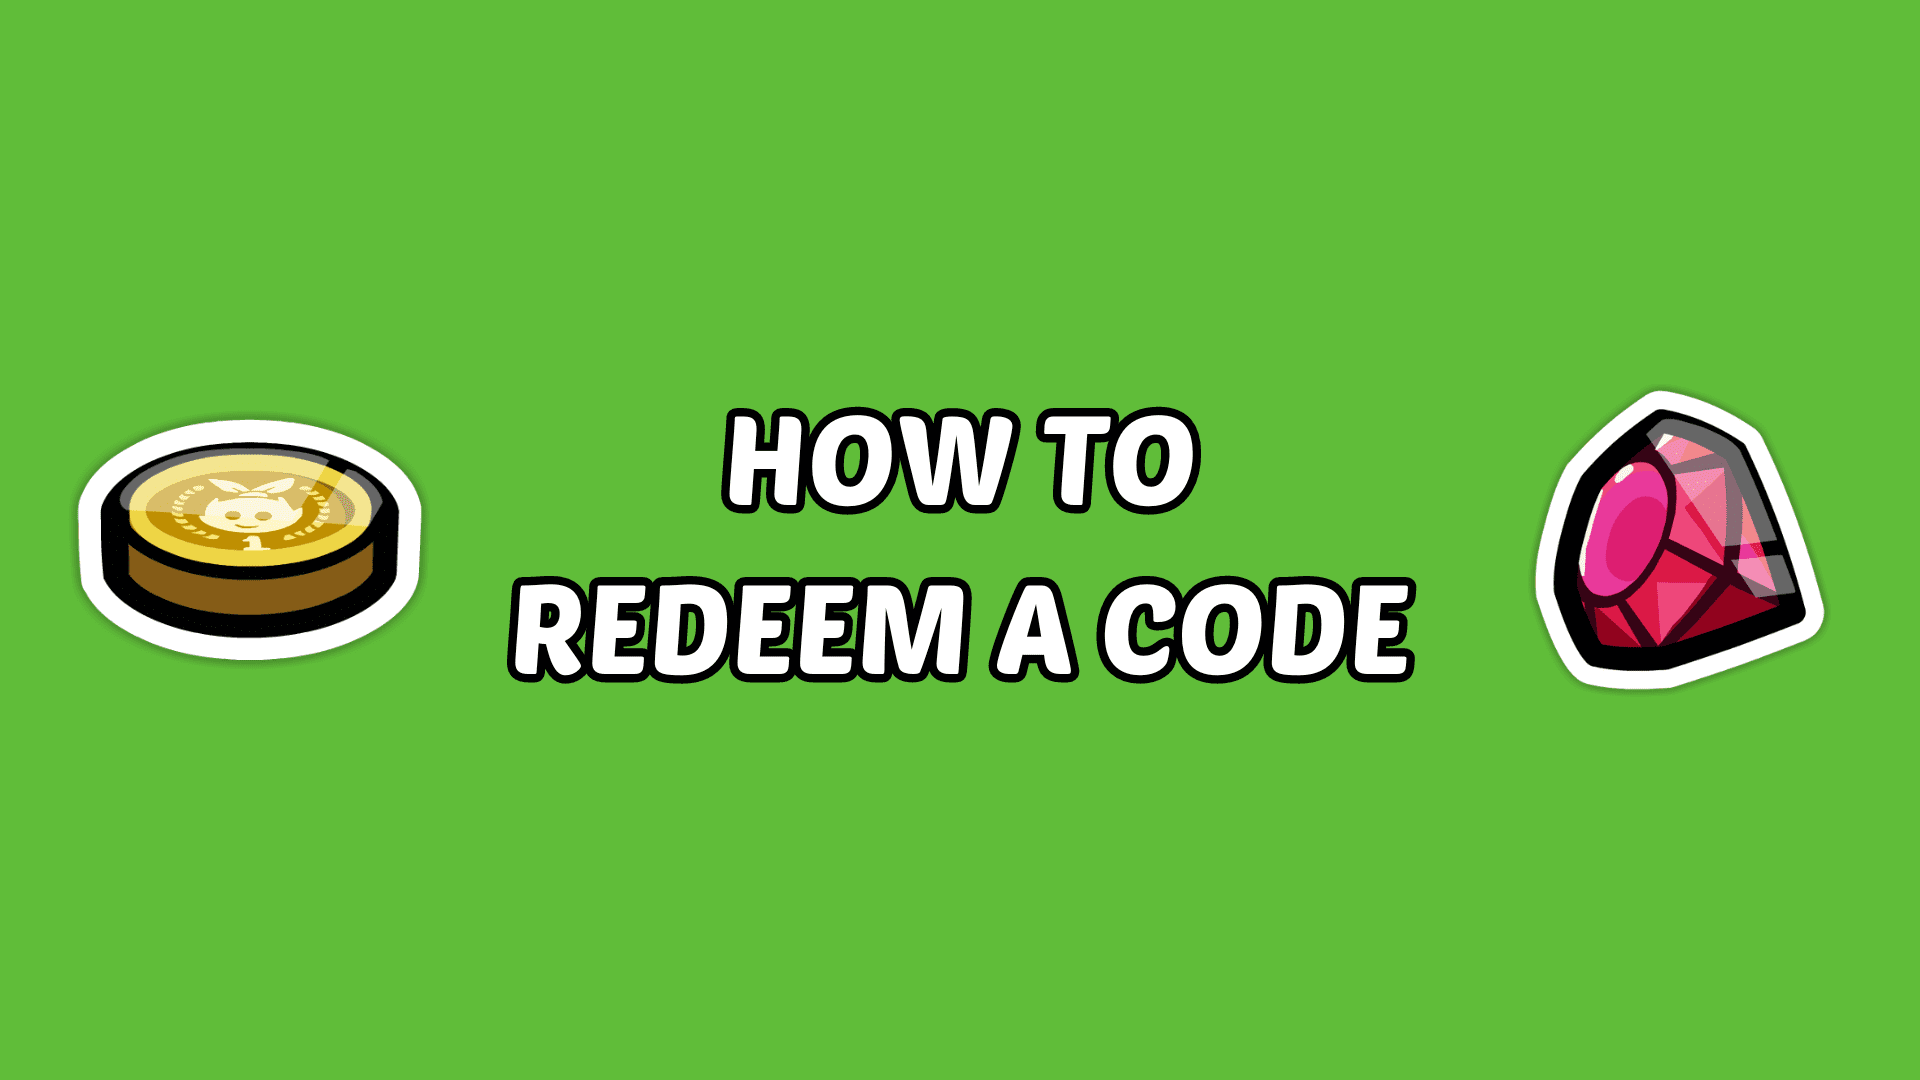 How to Redeem a Code text with icons of a yellow coin and red Ruby against a green background